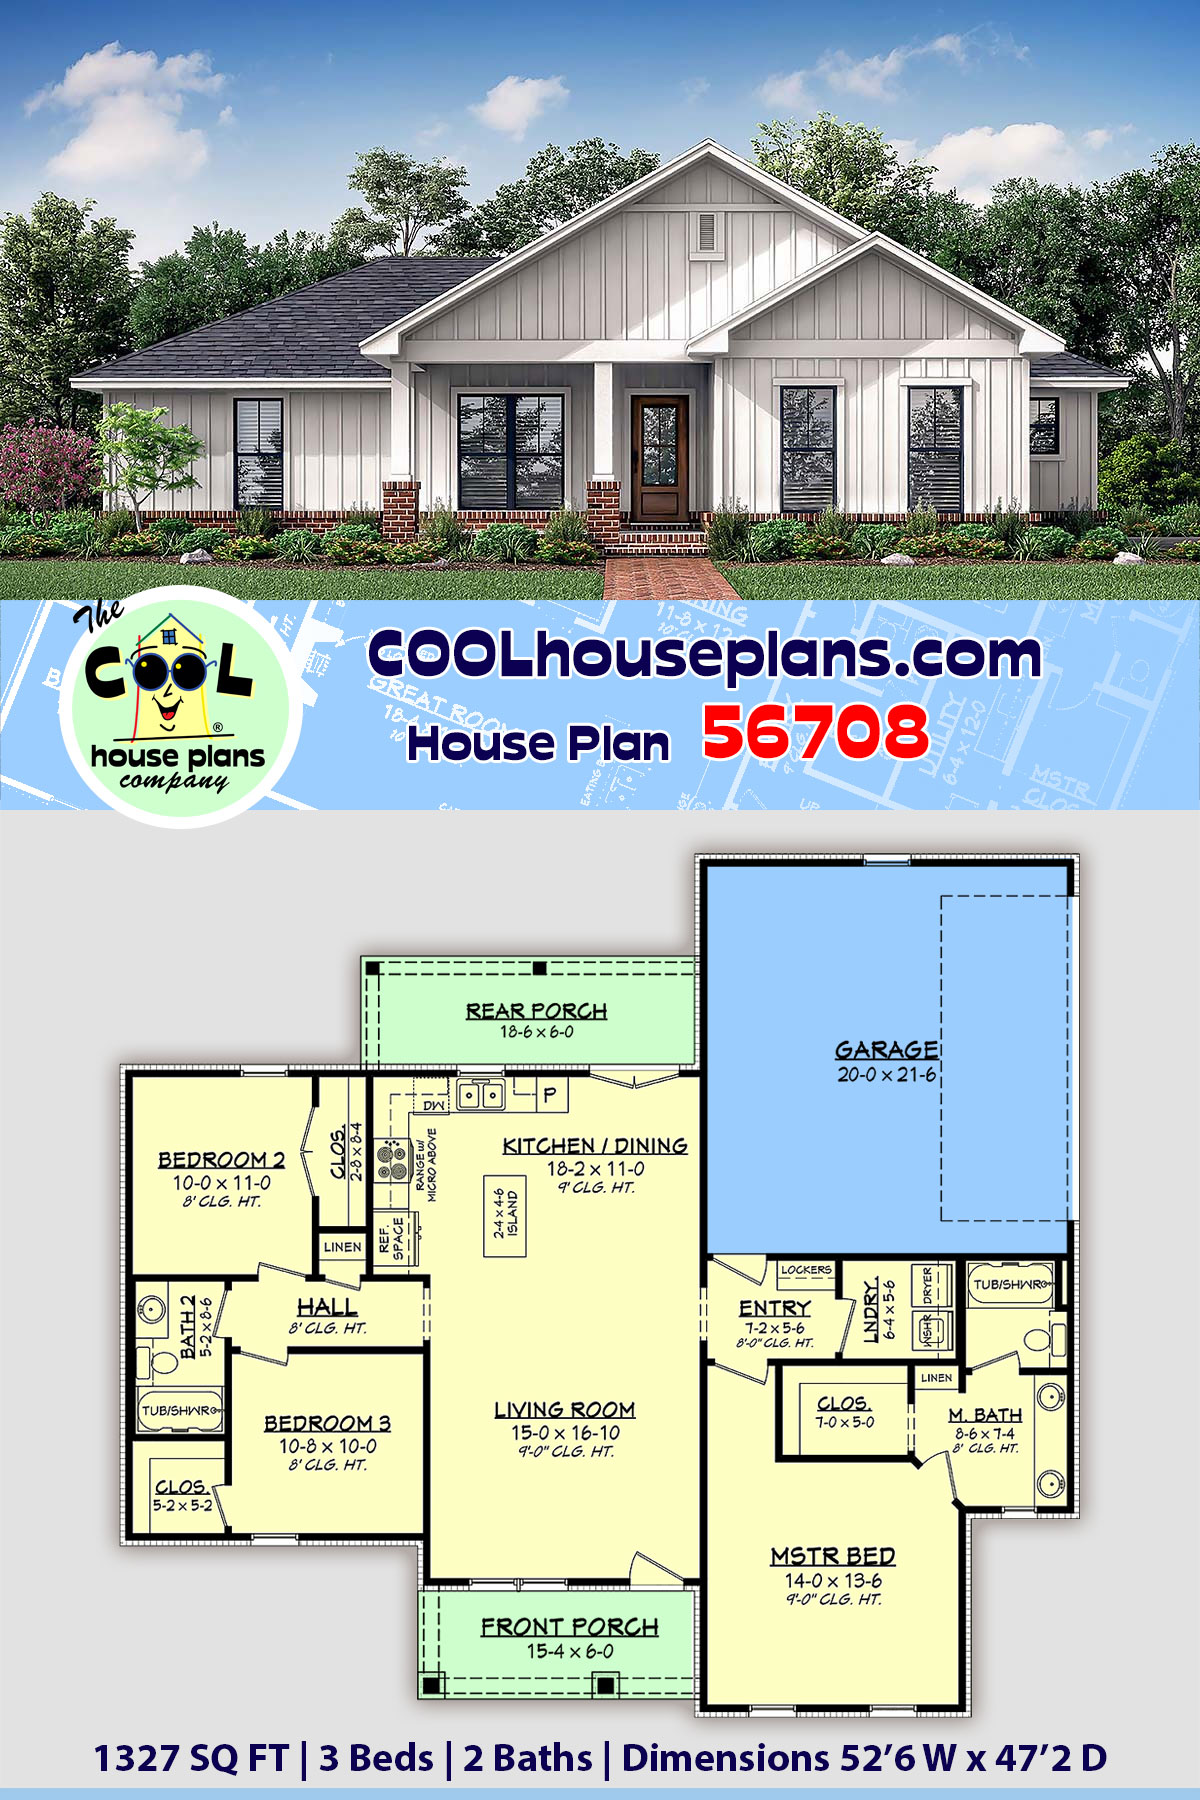 Country, Craftsman, Farmhouse, Traditional House Plan 56708 with 3 Beds, 2 Baths, 2 Car Garage